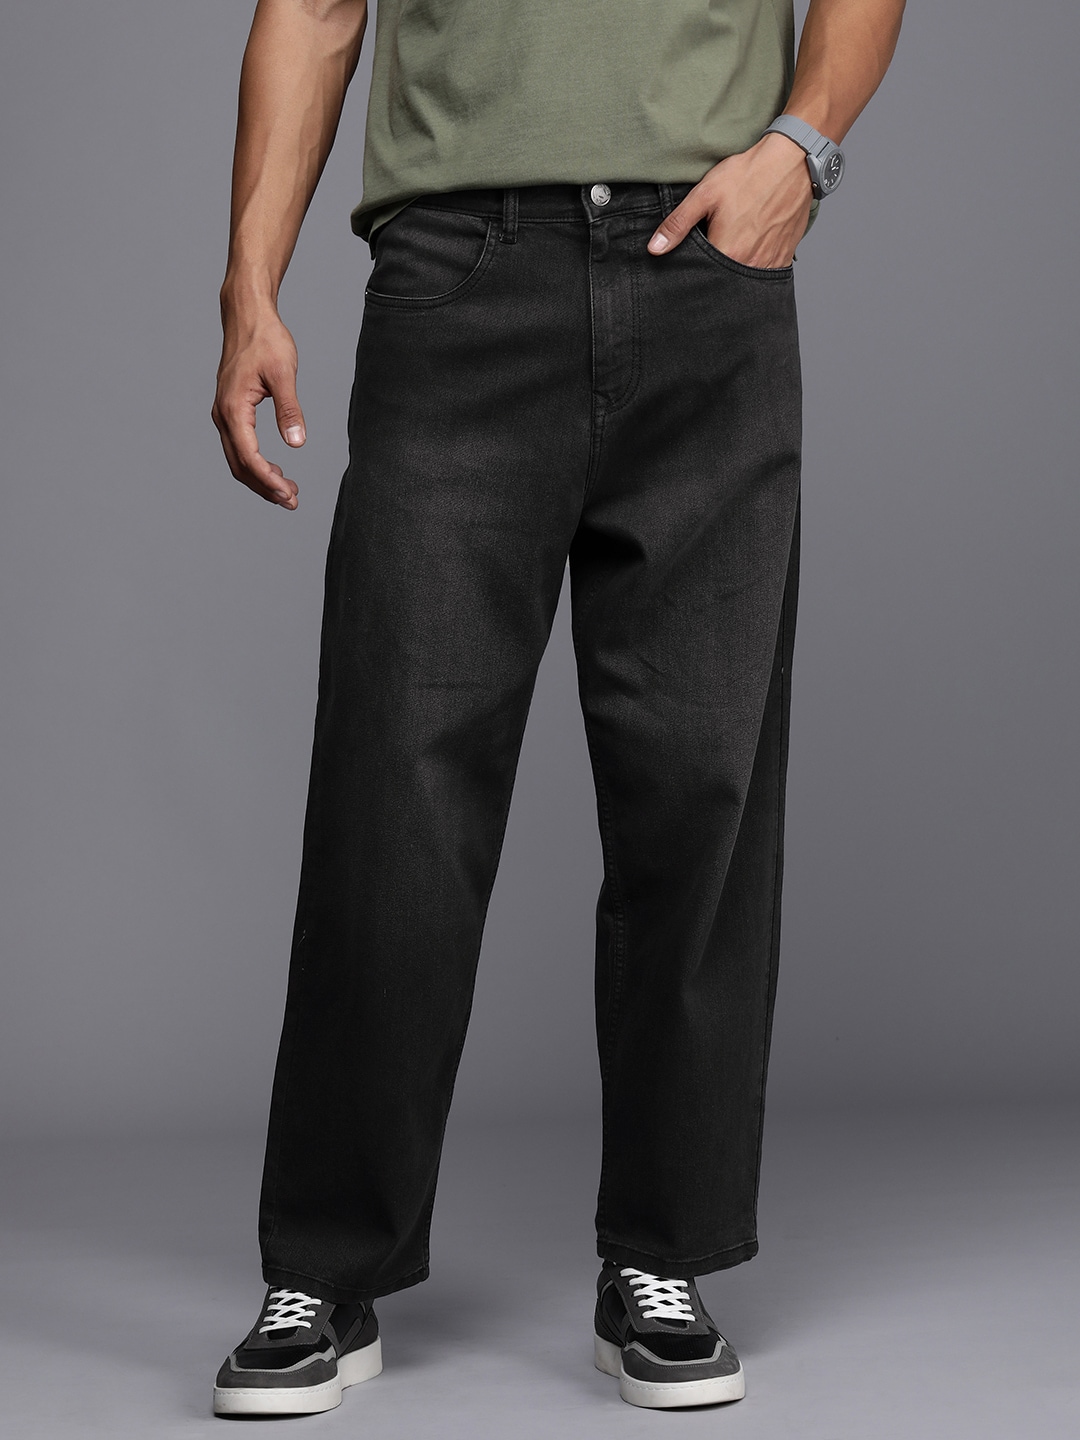 WROGN Men Loose Fit Stretchable Jeans